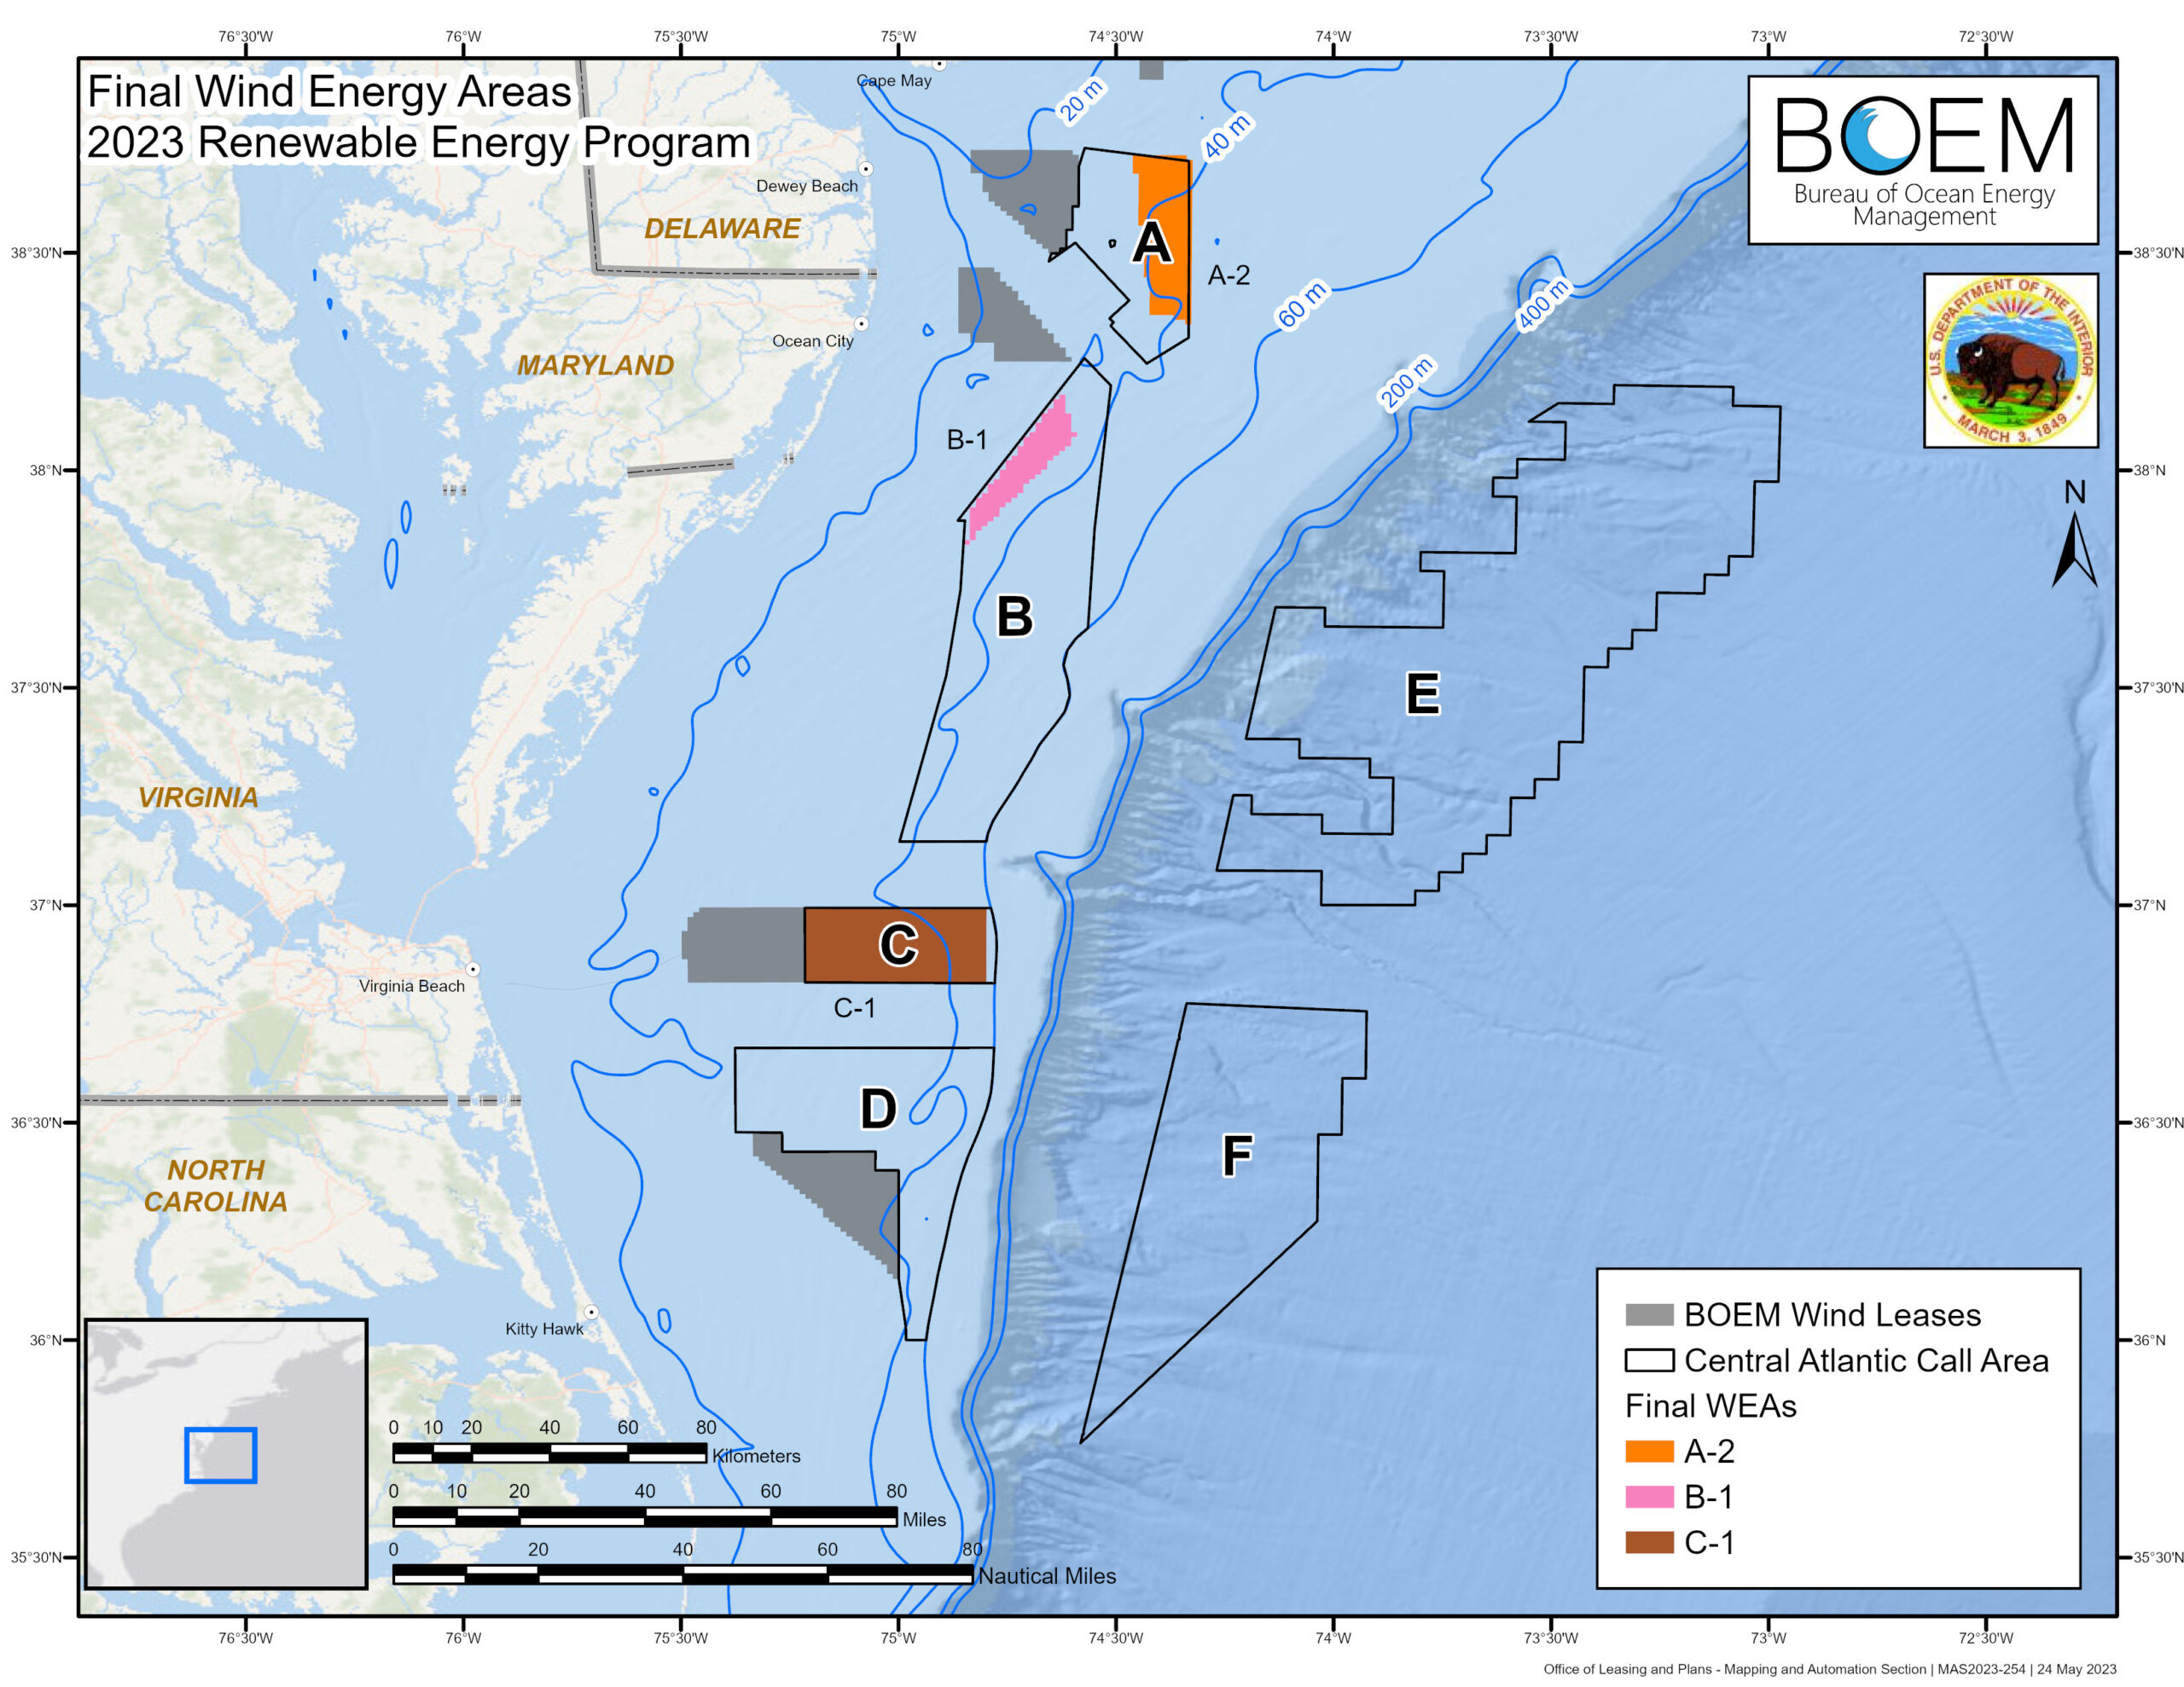 Final Wind Energy Areas Identified in the Central Atlantic